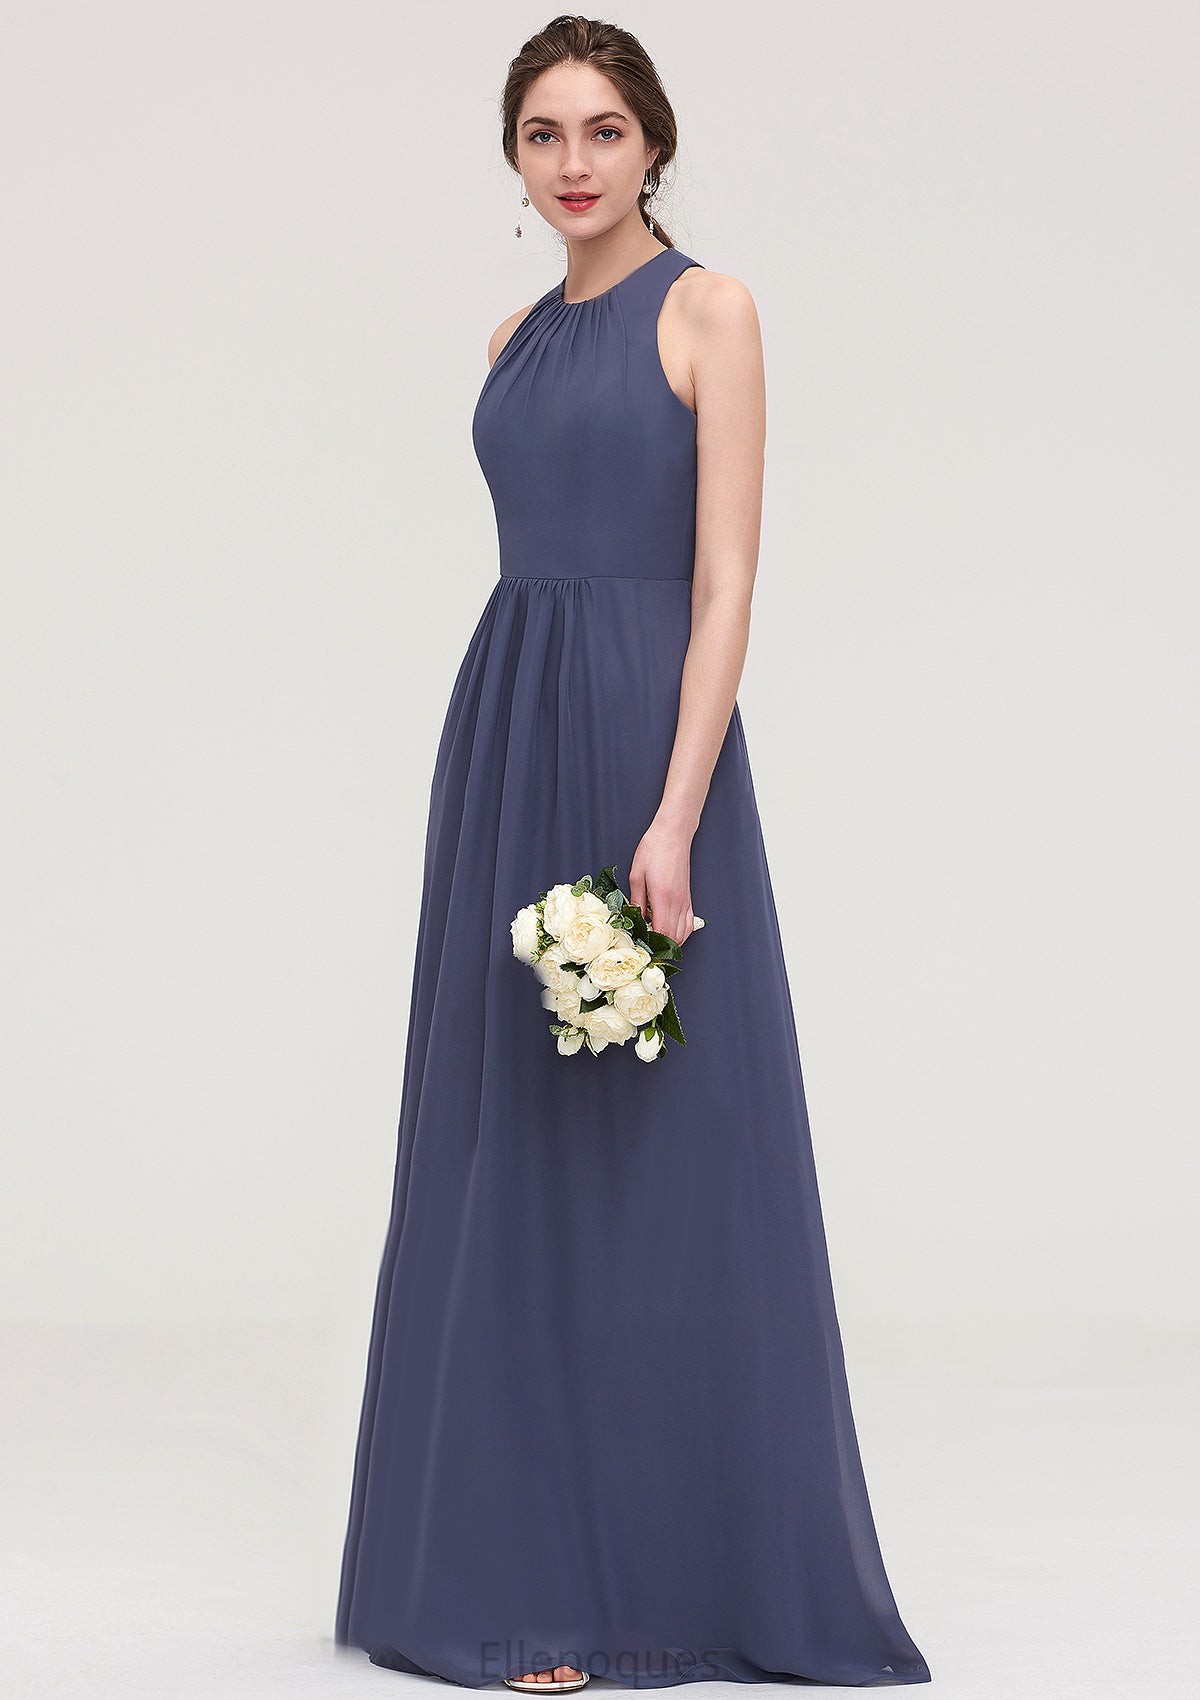 Sleeveless Scoop Neck ong/Floor-Length Chiffon A-line/Princess LStormy Bridesmaid Dresses With Pleated Mylie HOP0025470